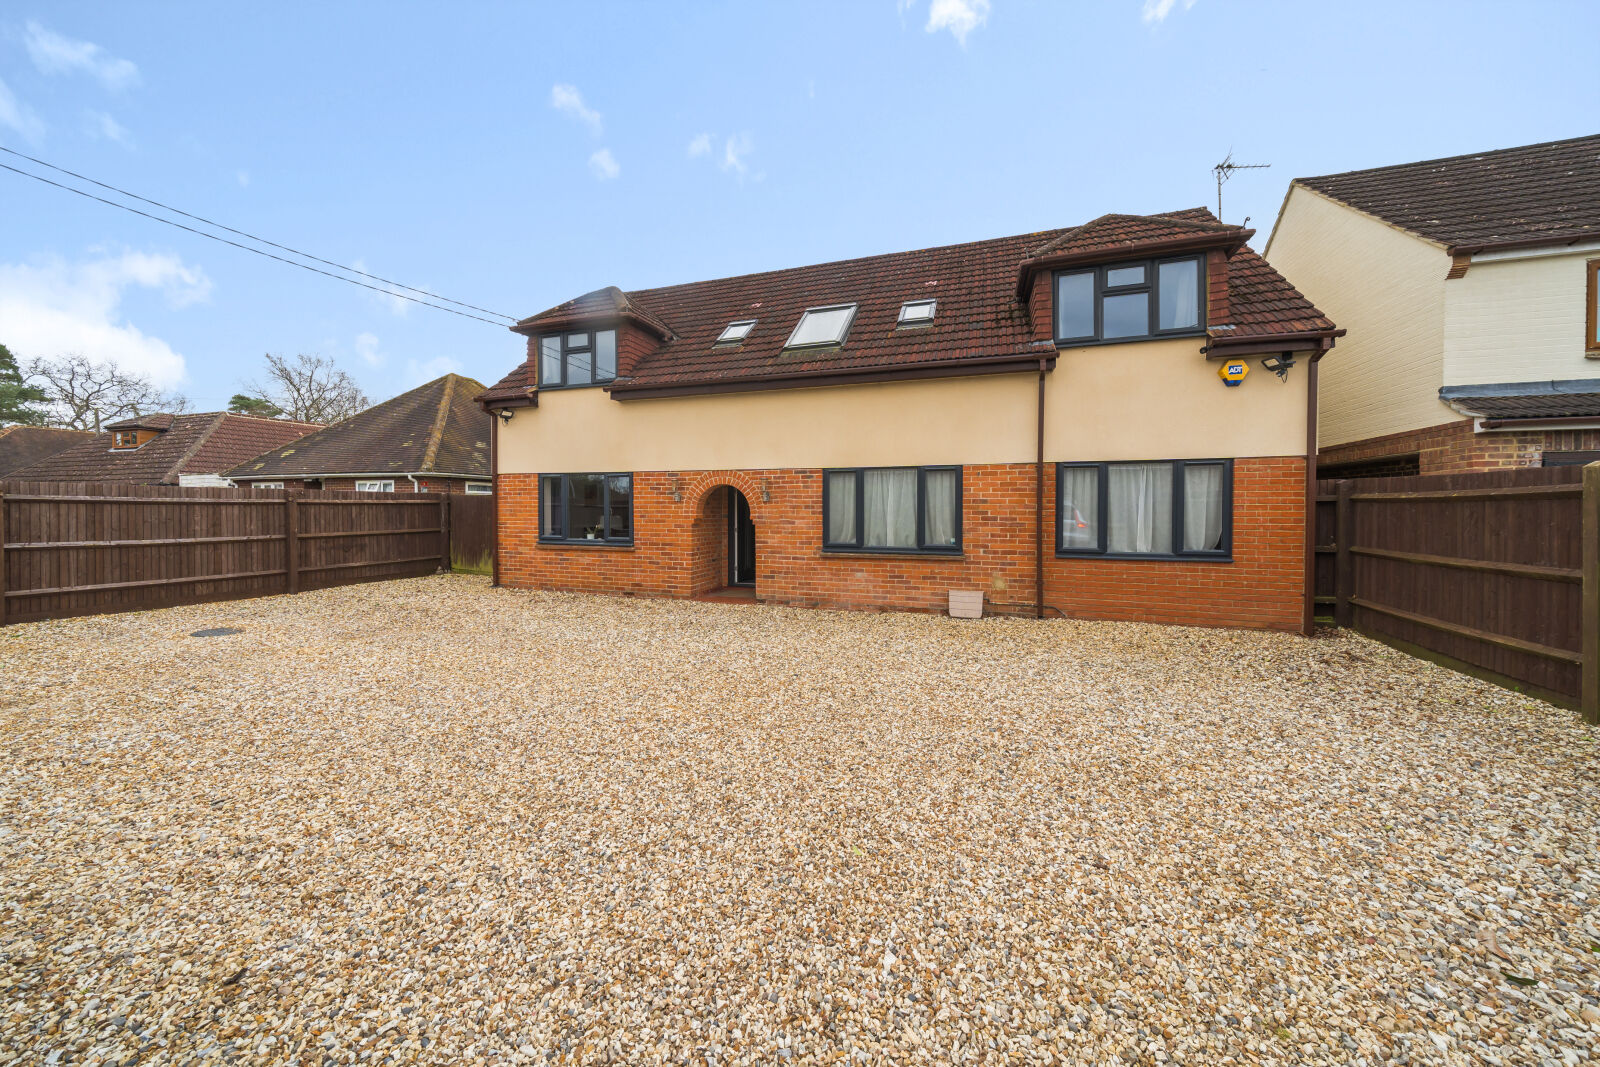 4 bedroom detached house for sale Clayhill Road, Burghfield Common, RG7, main image